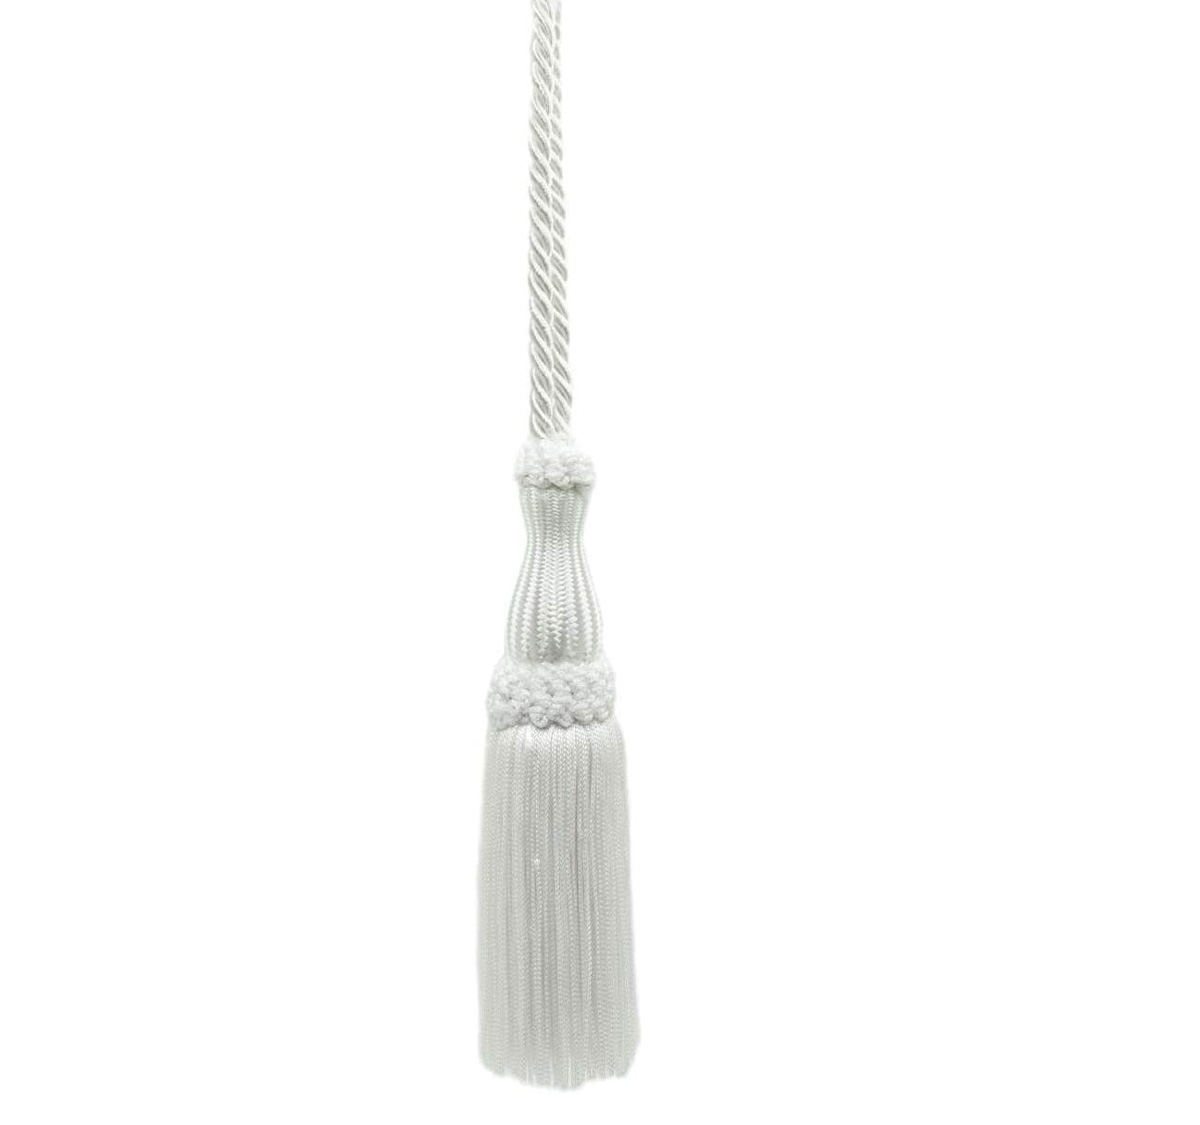 Beautiful White Decorative Chainette Key Tassel, 5 inch Tassel Length, 5 Inch Loop, Color A1 - White